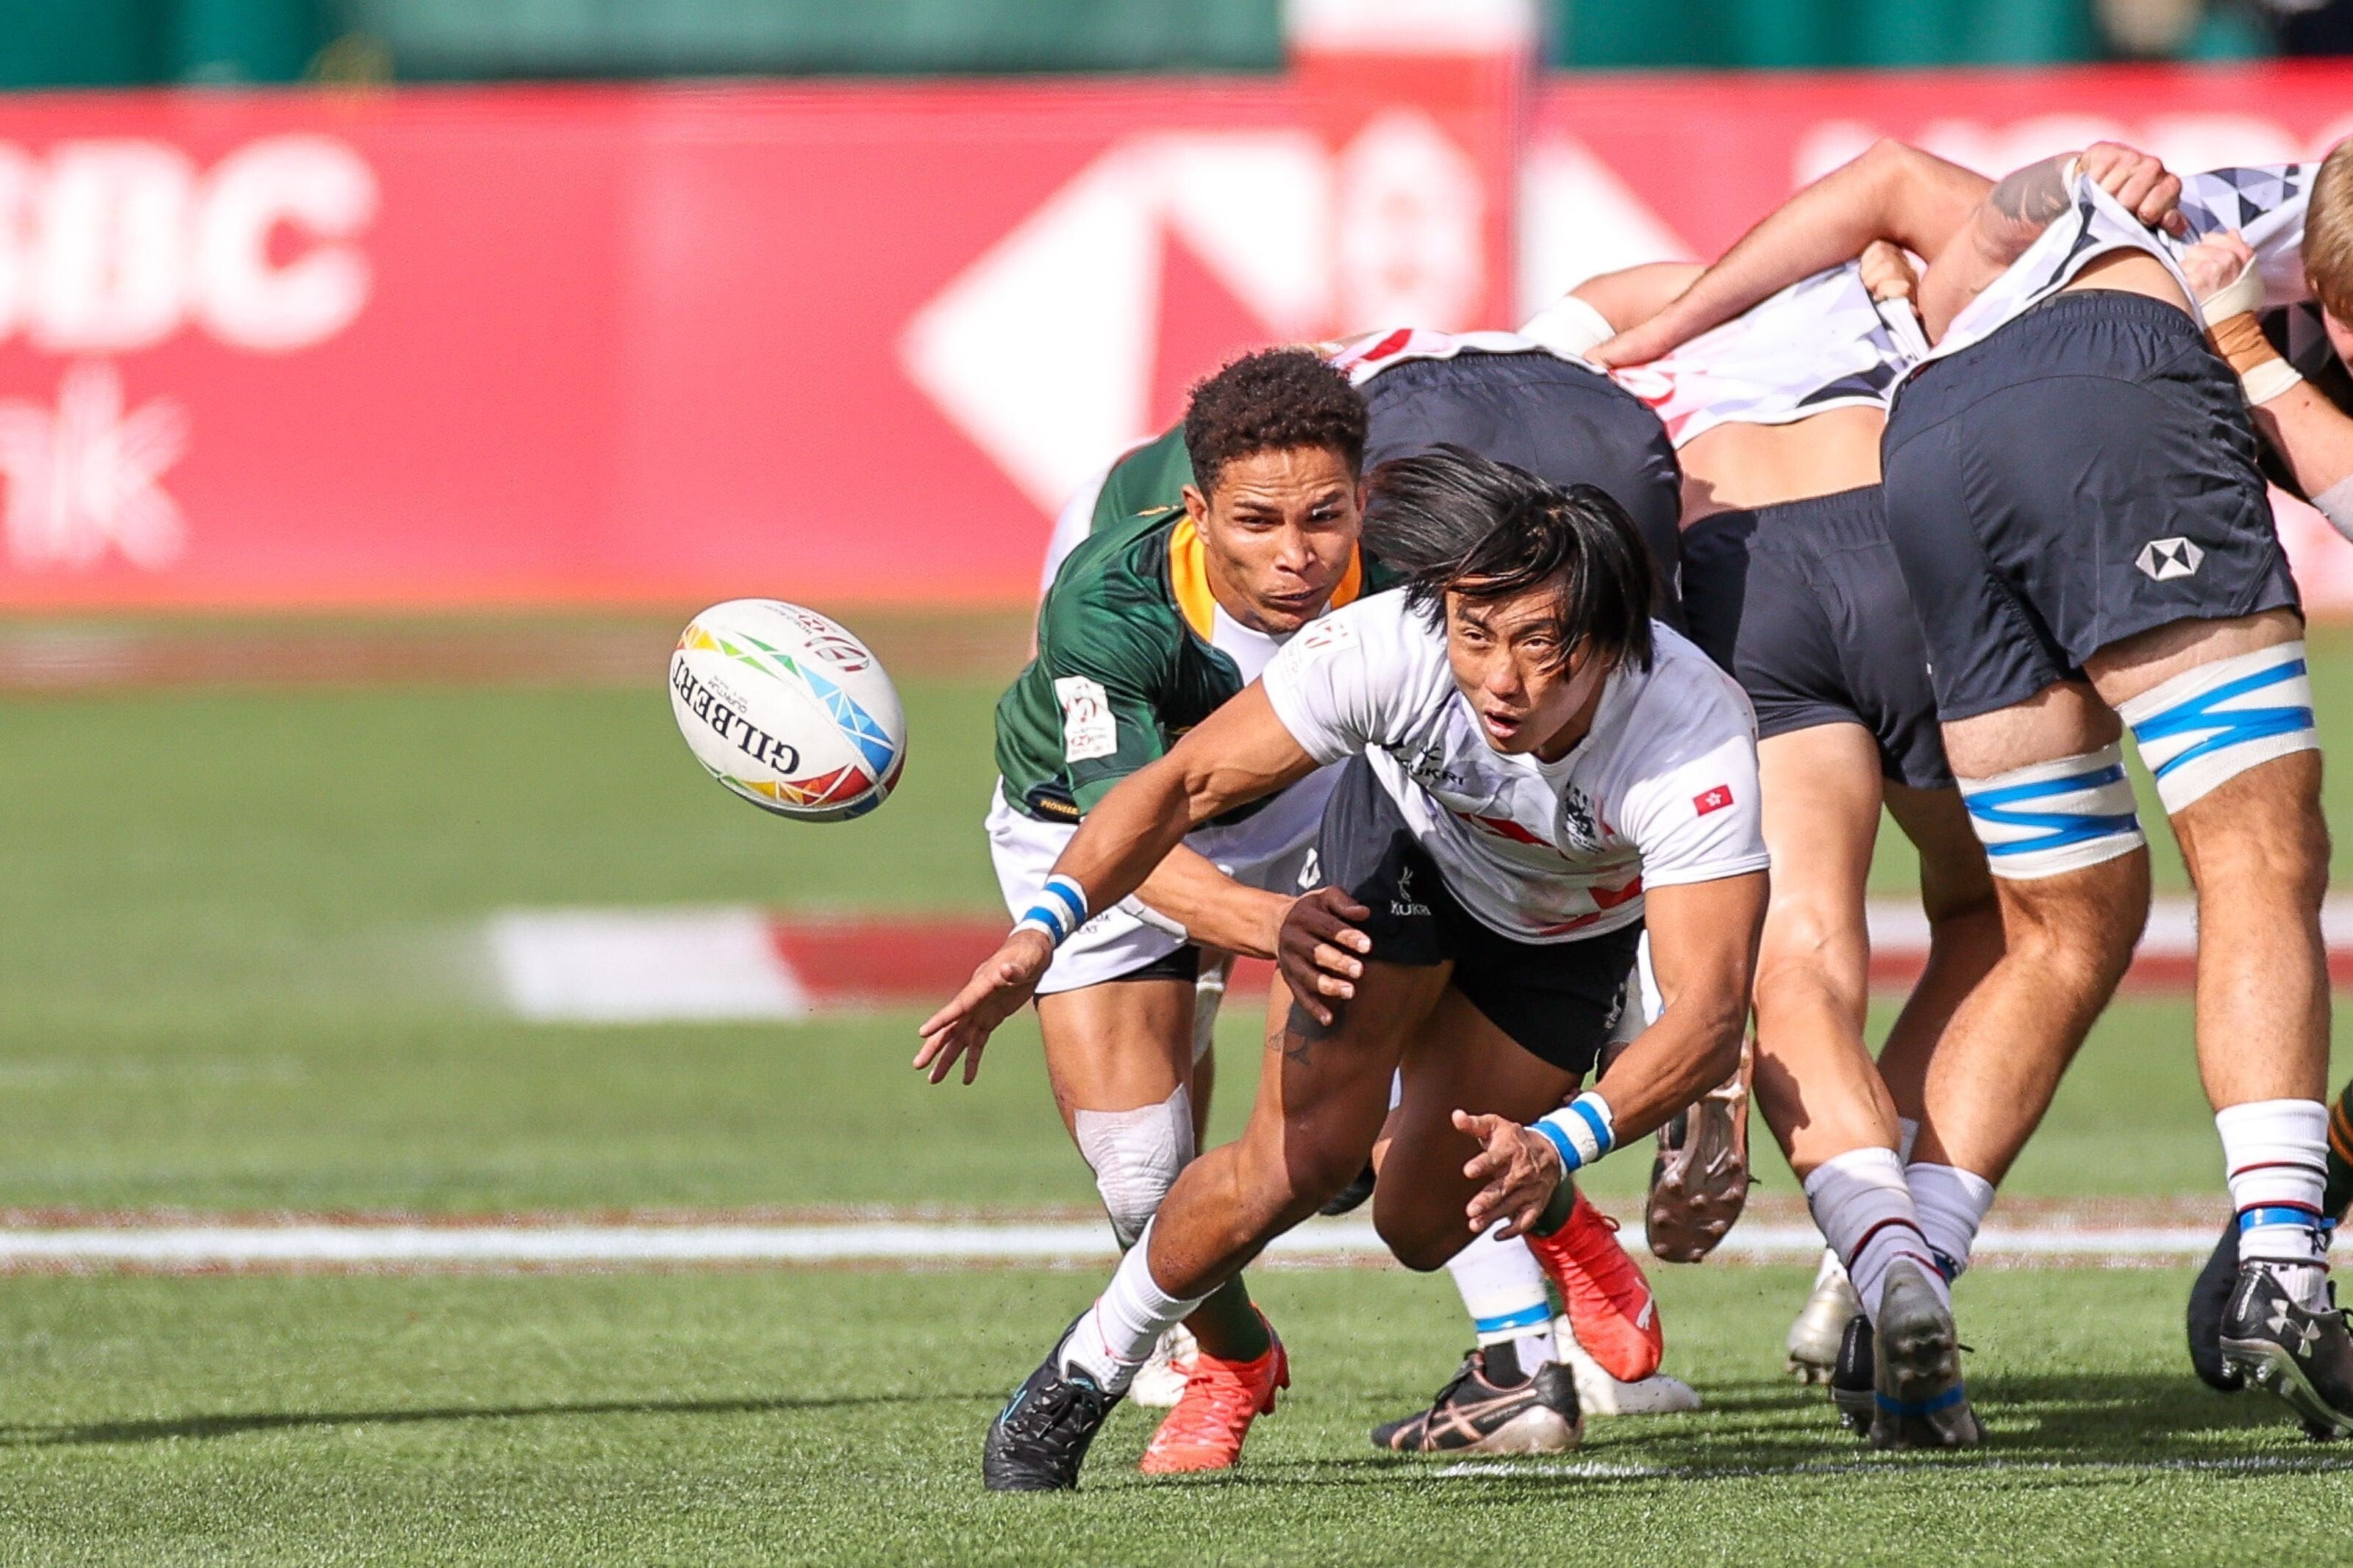 Hong Kong’s Cado Lee Ka-to passes the ball under pressure from South Africa during day one pool play. Photos: HKRU